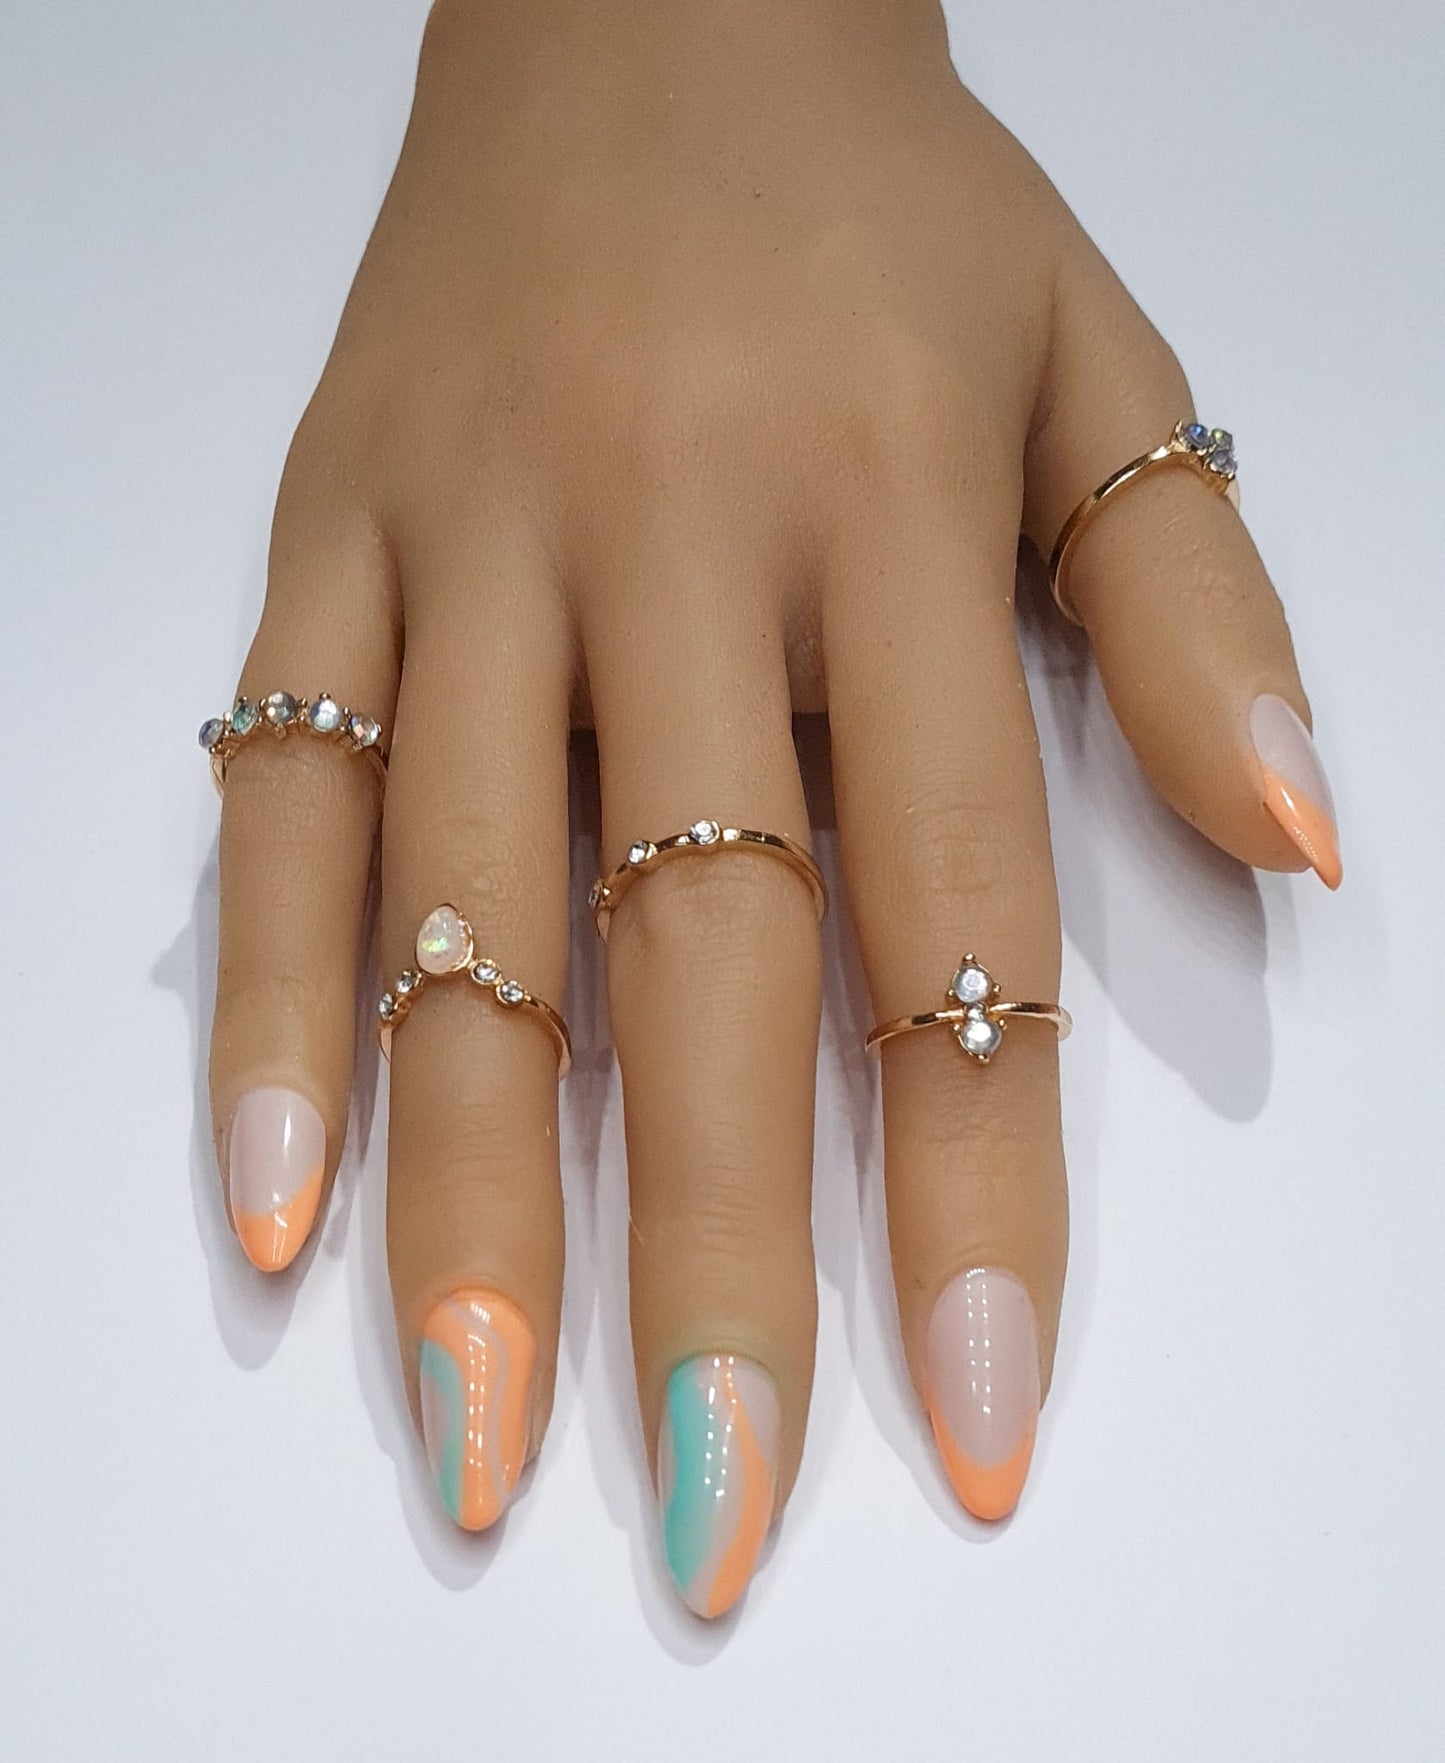 Press On Nails- Almond Shaped Two Tone Swirl French Tip mint green peach spring summer collection orange blue full cover gel tip luxury false nails salon quality hand painted custom made uk